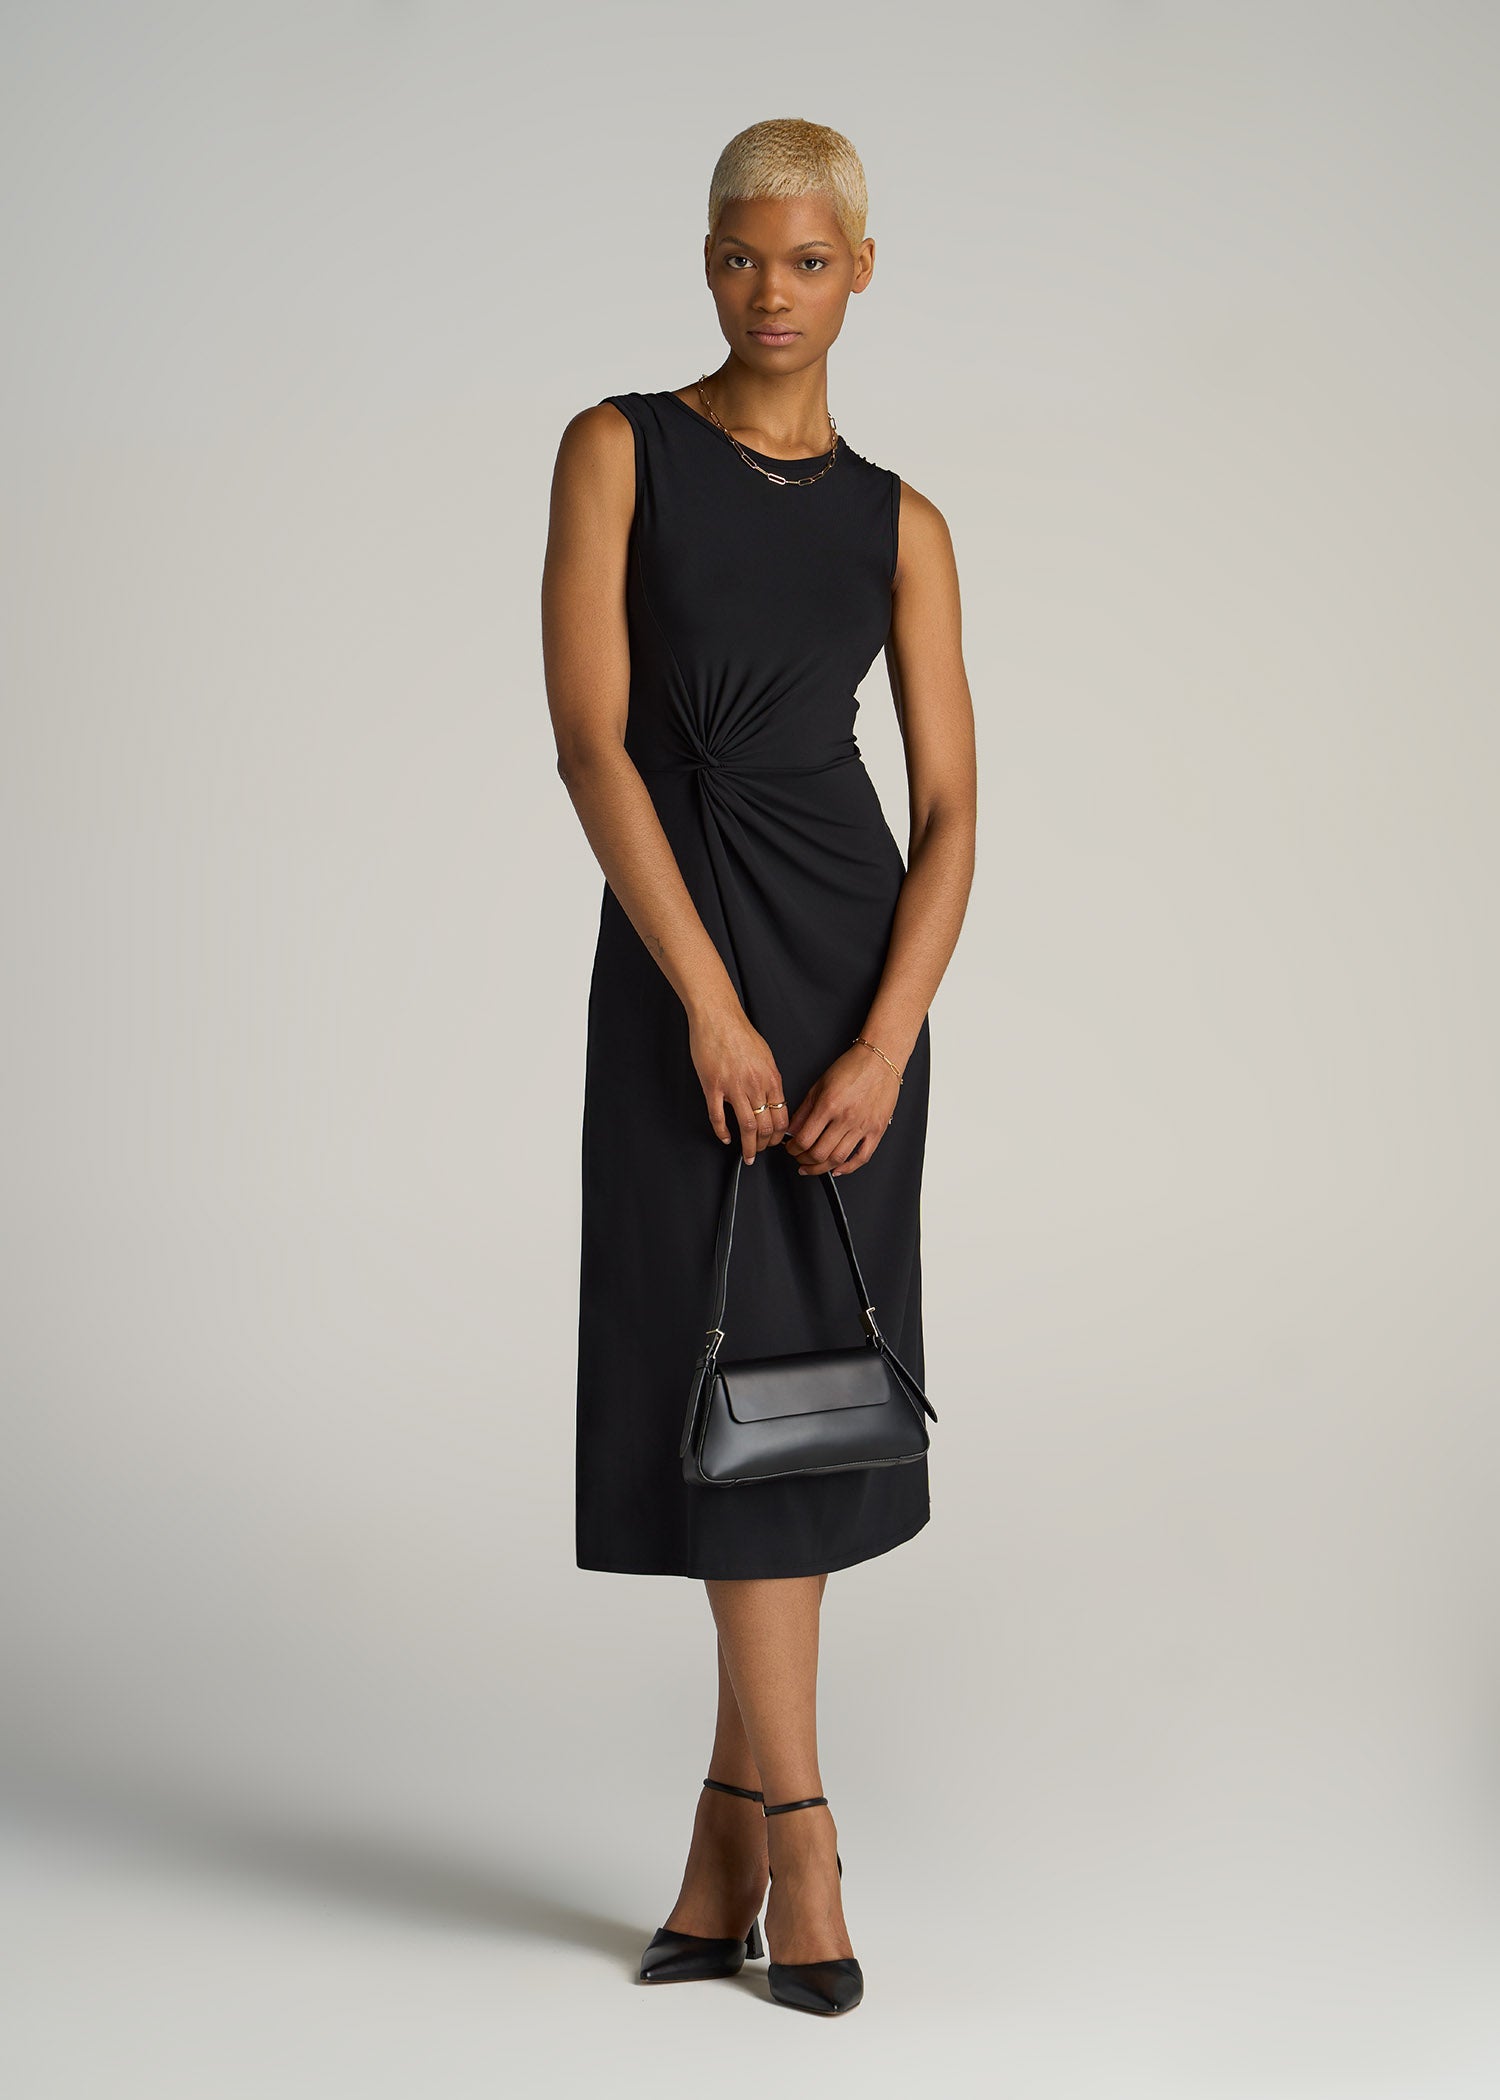 Sleeveless Knot Front Dress for Tall Women in Black